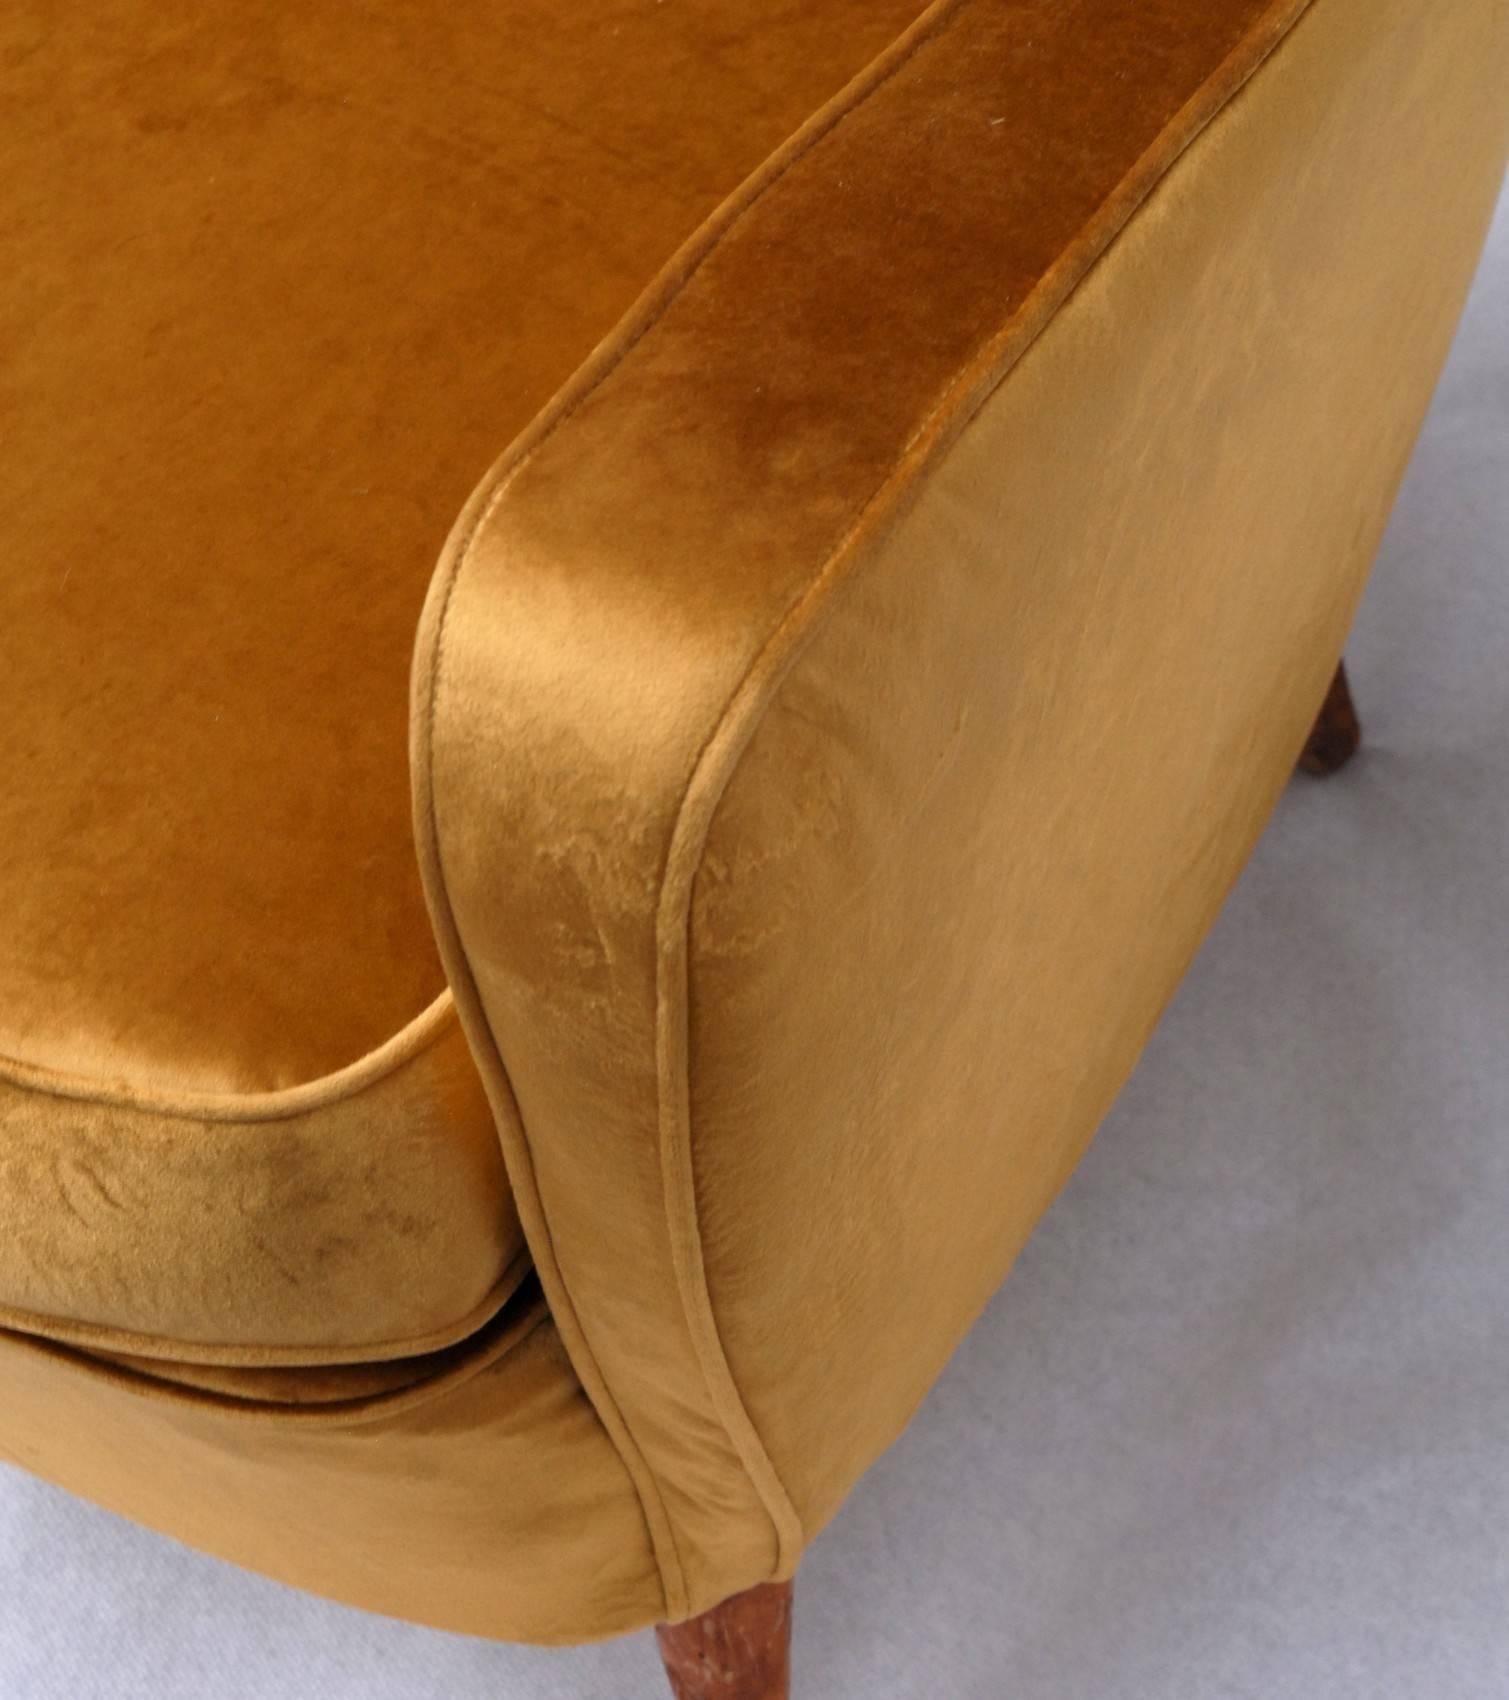 Organic curved armchair, icon of the 1950s. Double settee sofa available to match, not yet upholstered. Armchair was upholstered with rich and glamorous Alessandro Bini's Tuscan woven Flou gold velvet that enhances the curves and makes it just